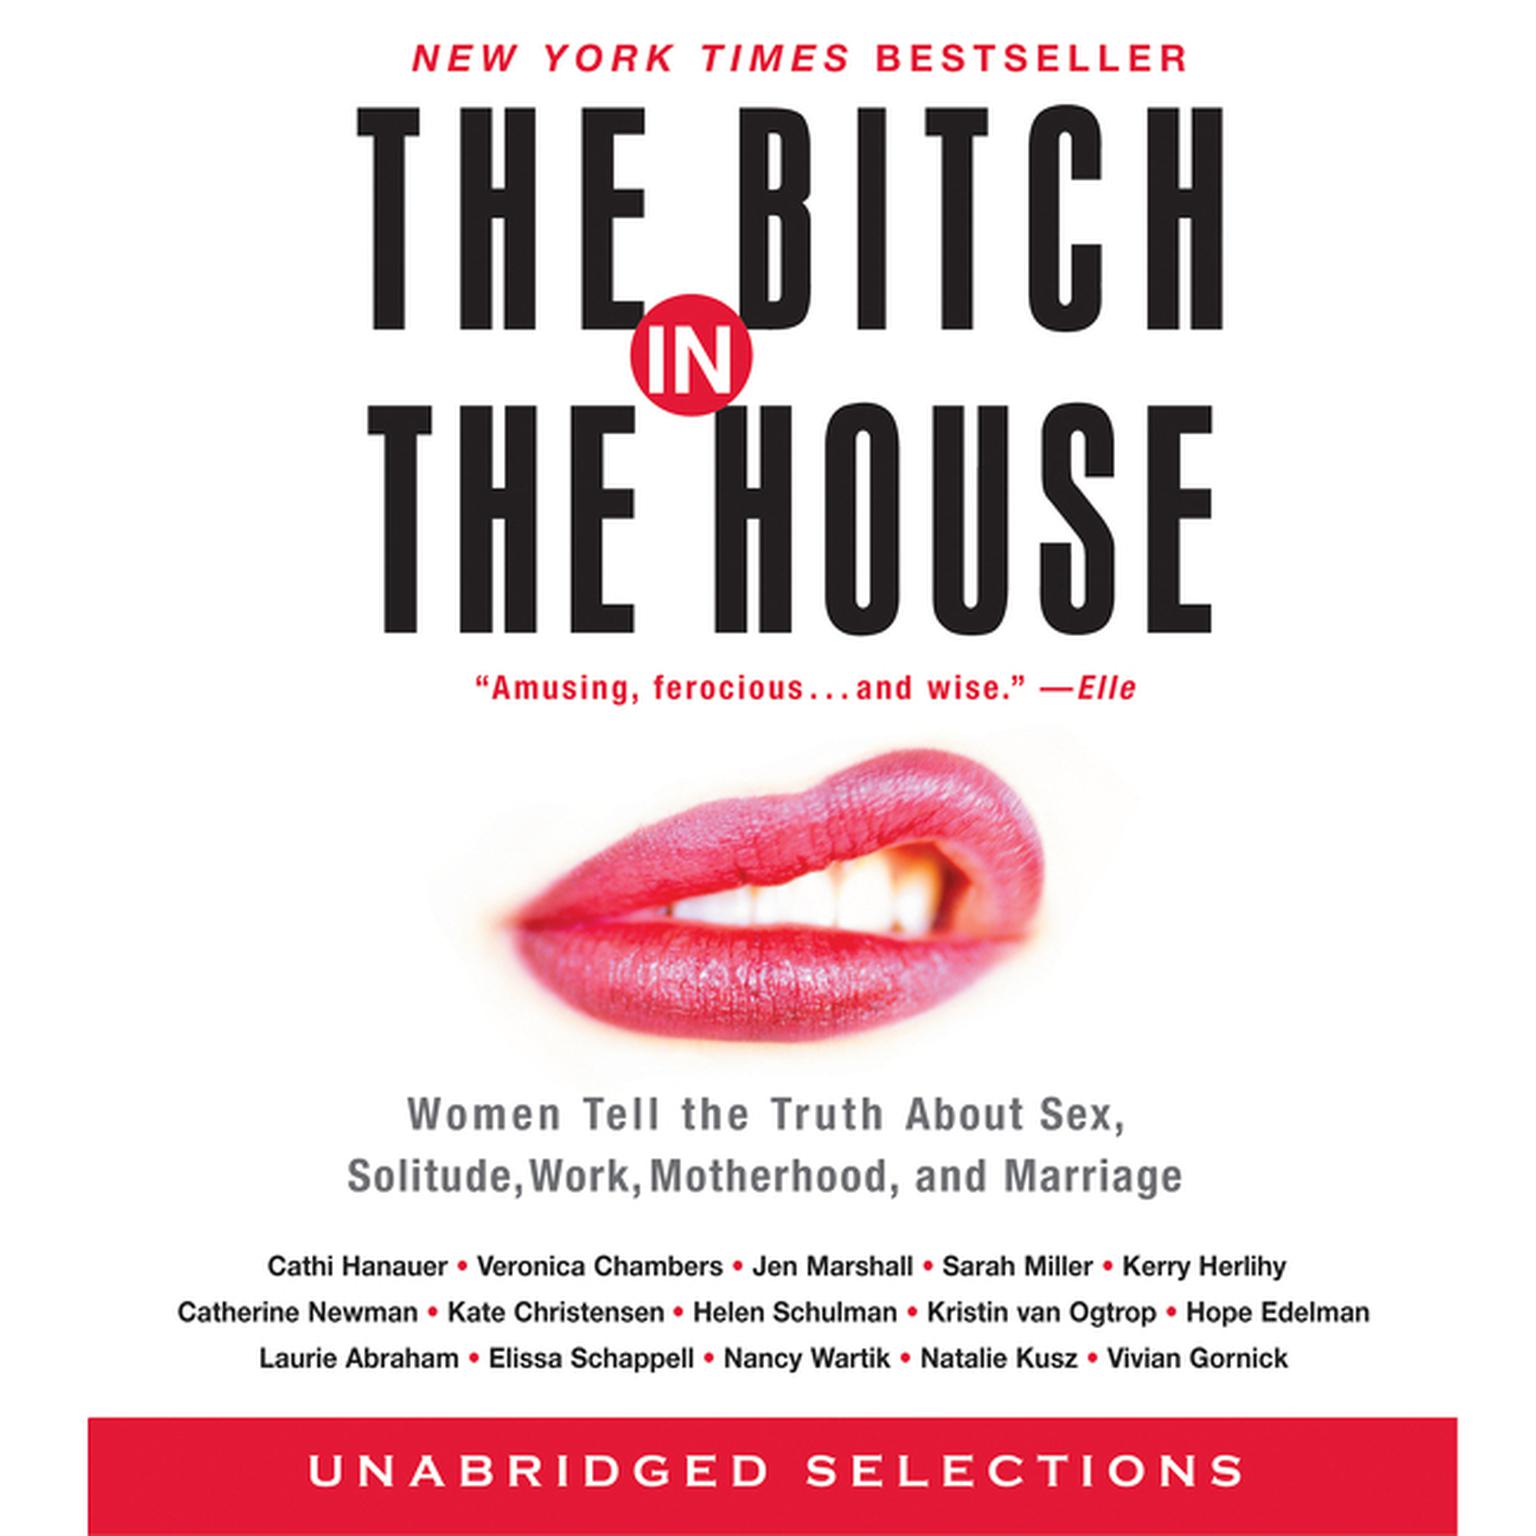 The Bitch in the House (Abridged): 26 Women Tell the Truth about Sex, Solitude, Work, Motherhood, and Marriage Audiobook, by Cathi Hanauer